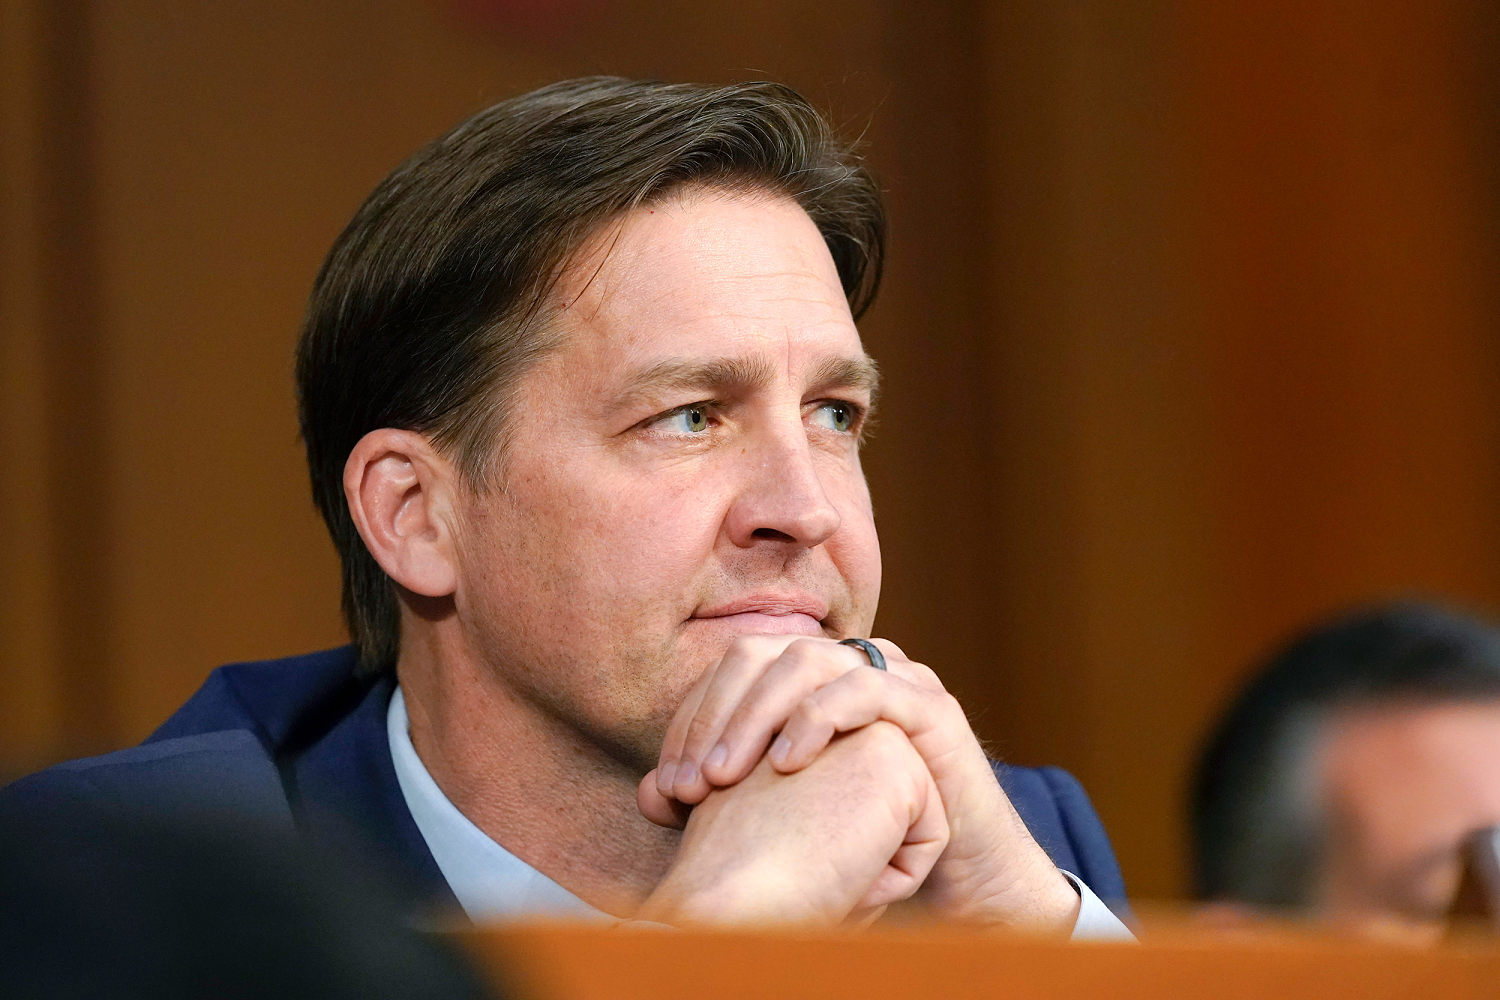 Ben Sasse resigns as University of Florida president after wife's epilepsy diagnosis